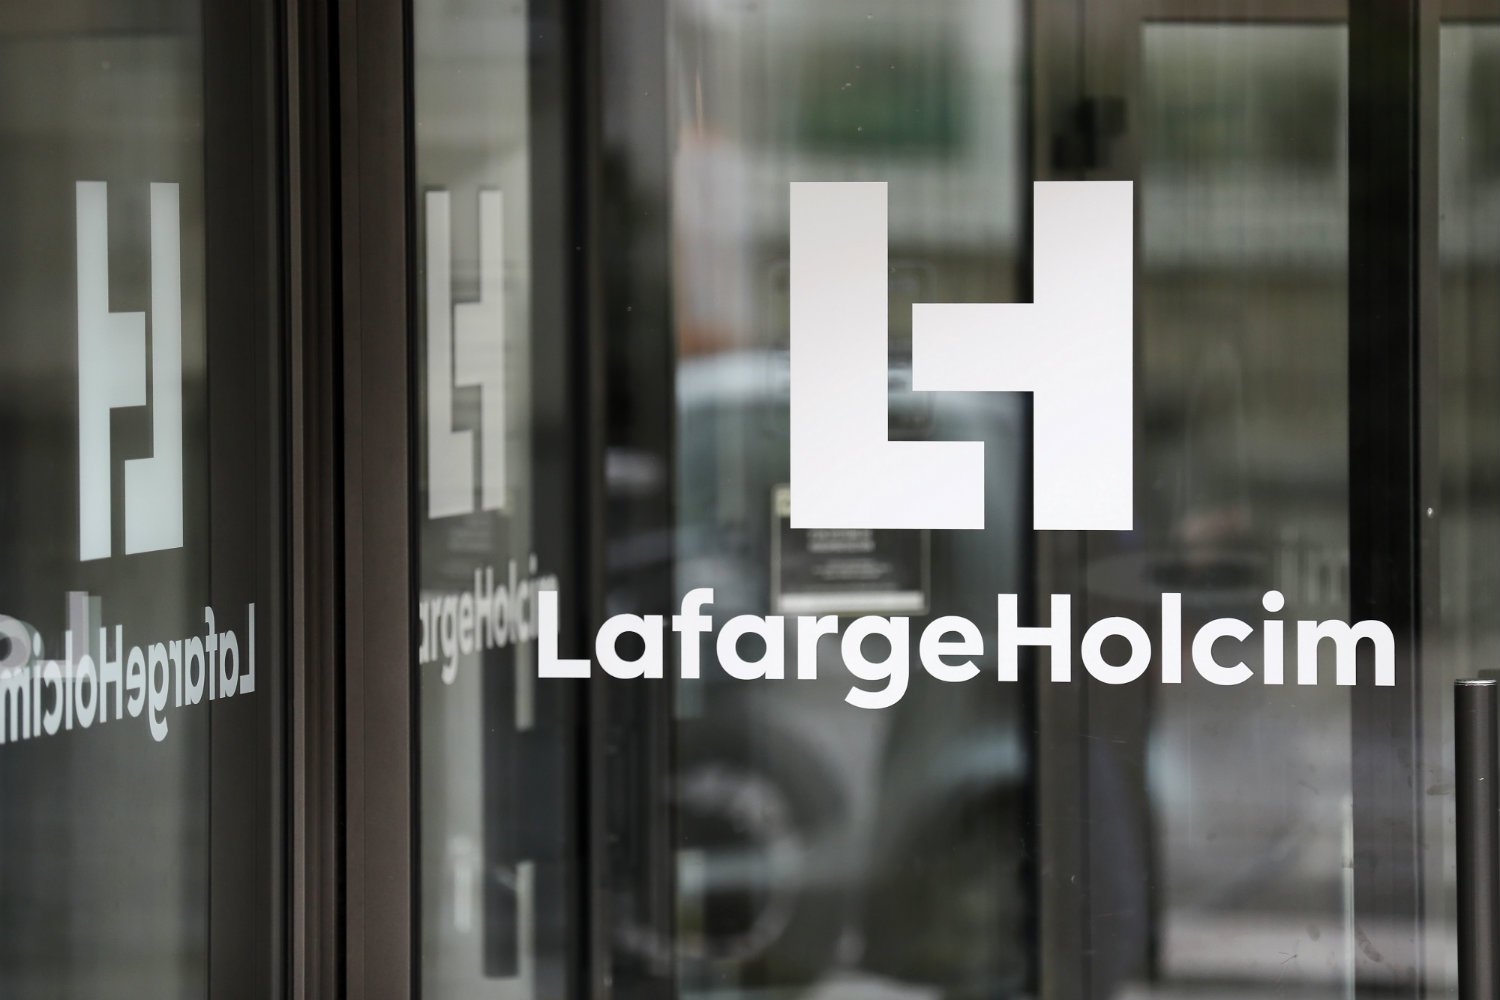 Ex-Lafarge boss charged with 'endangering lives' in Syria